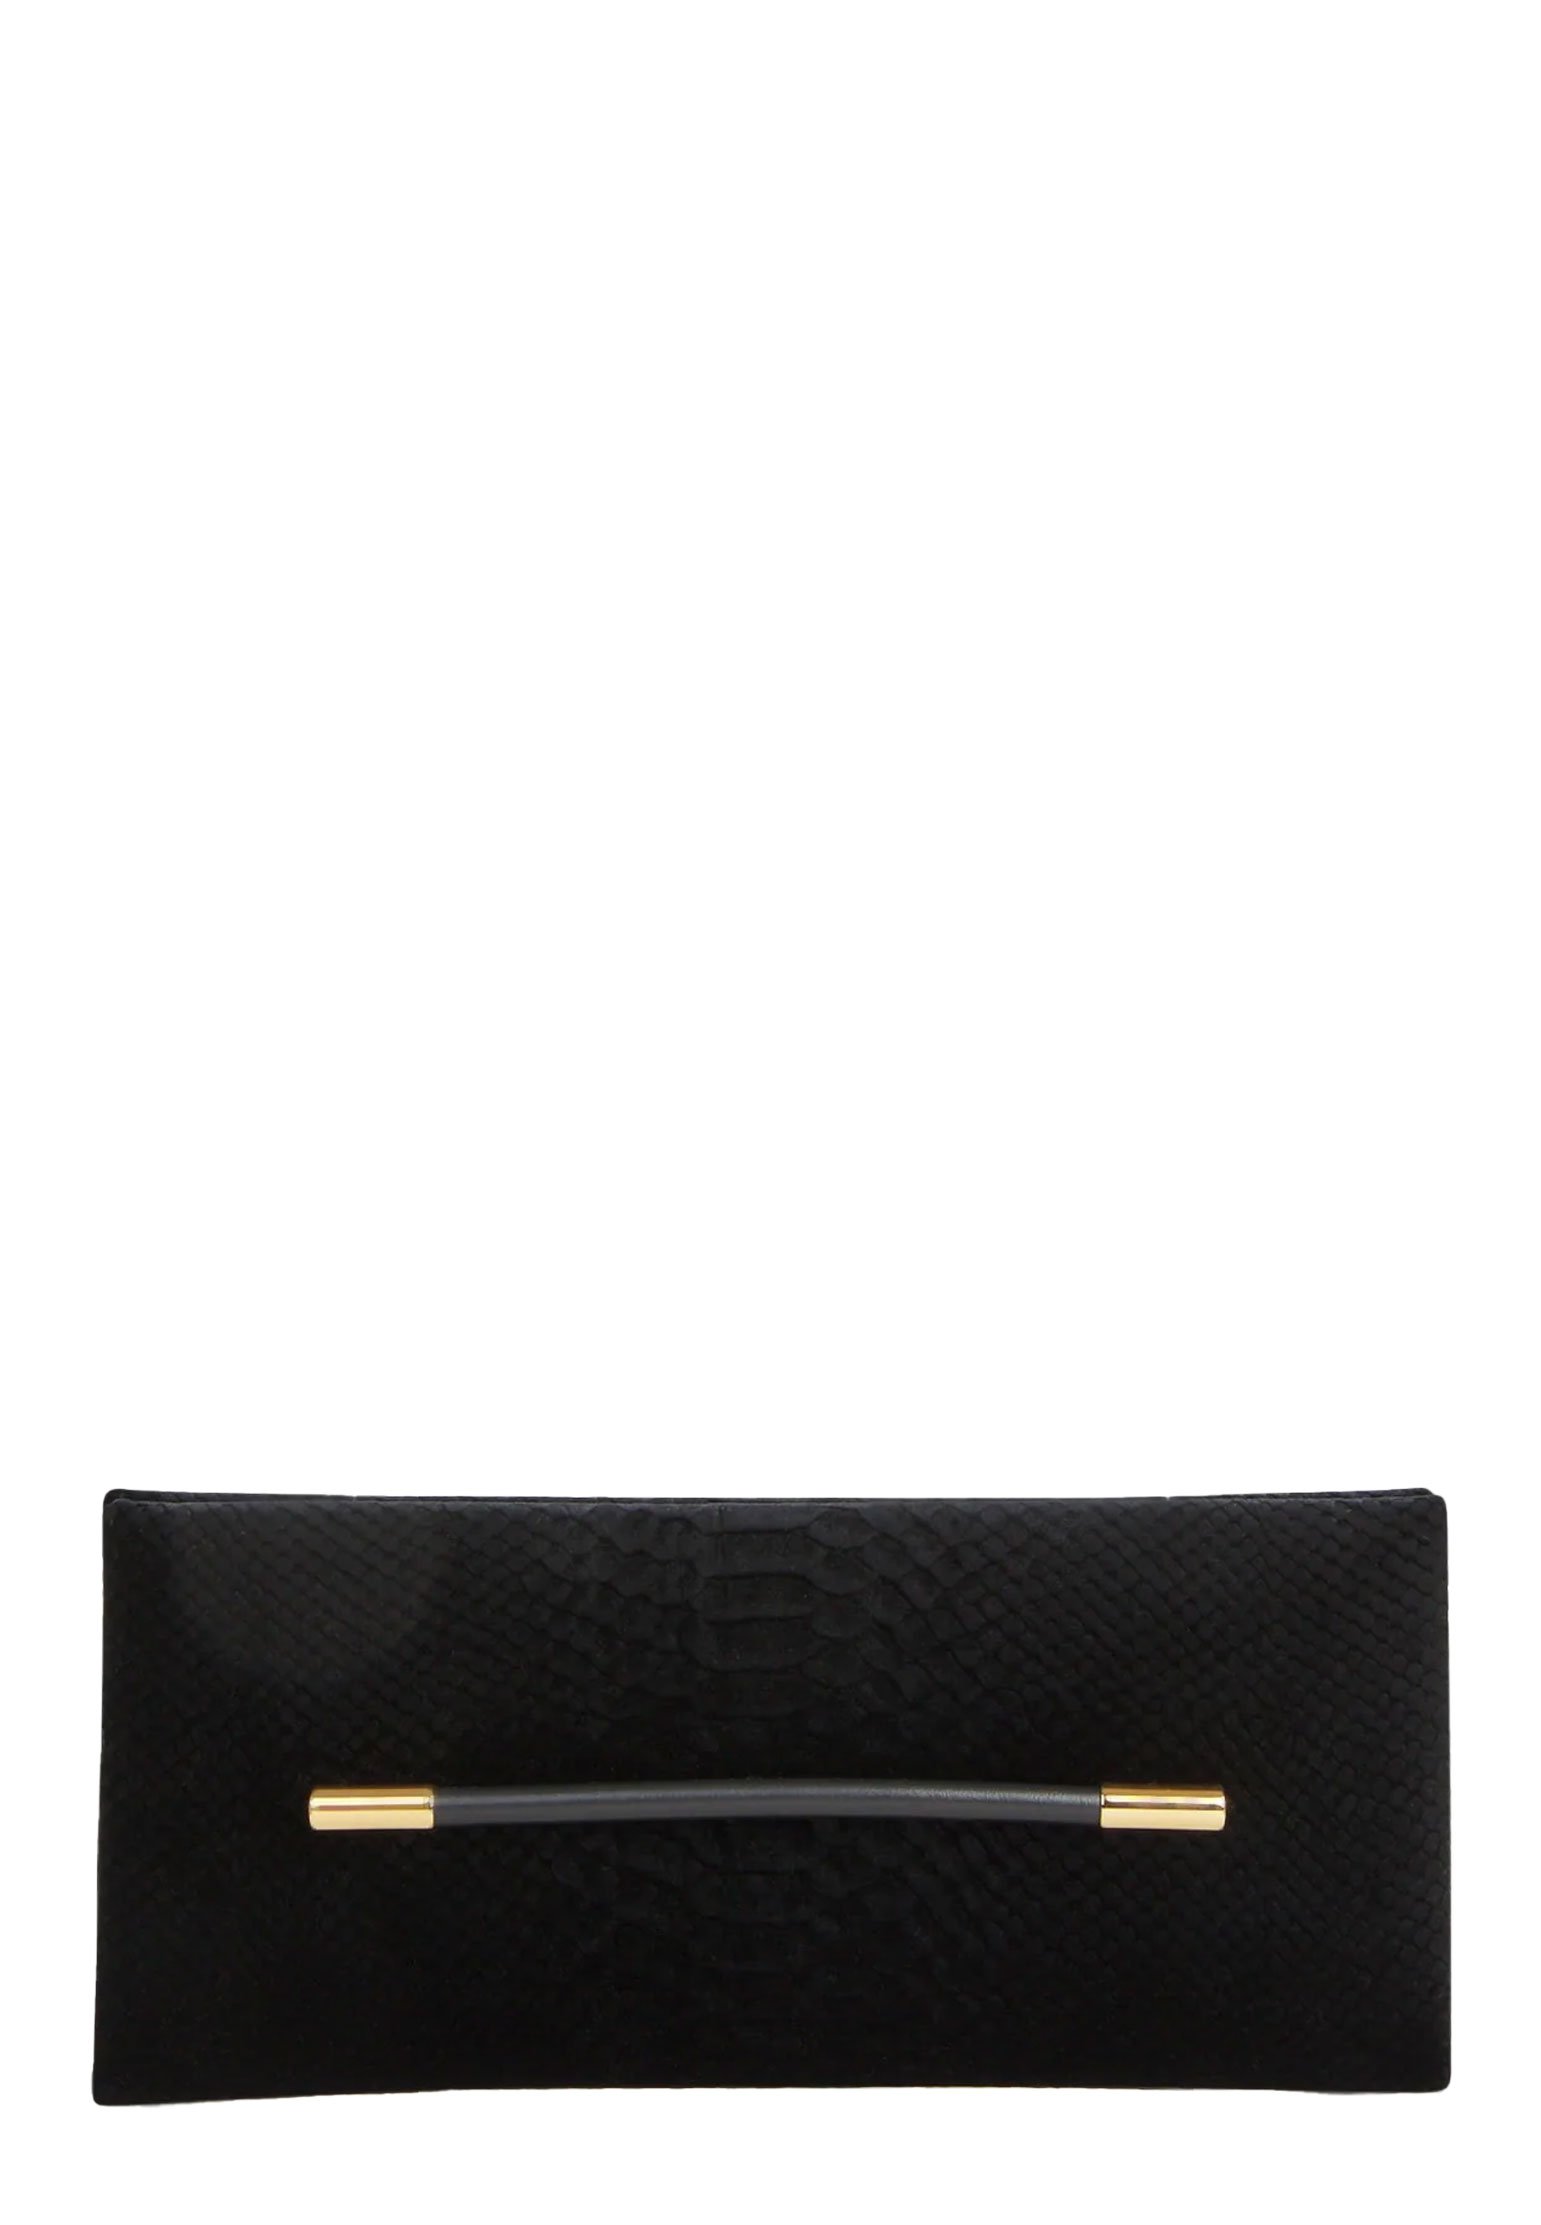 Clutch TOM FORD Color: black (Code: 3718) in online store Allure